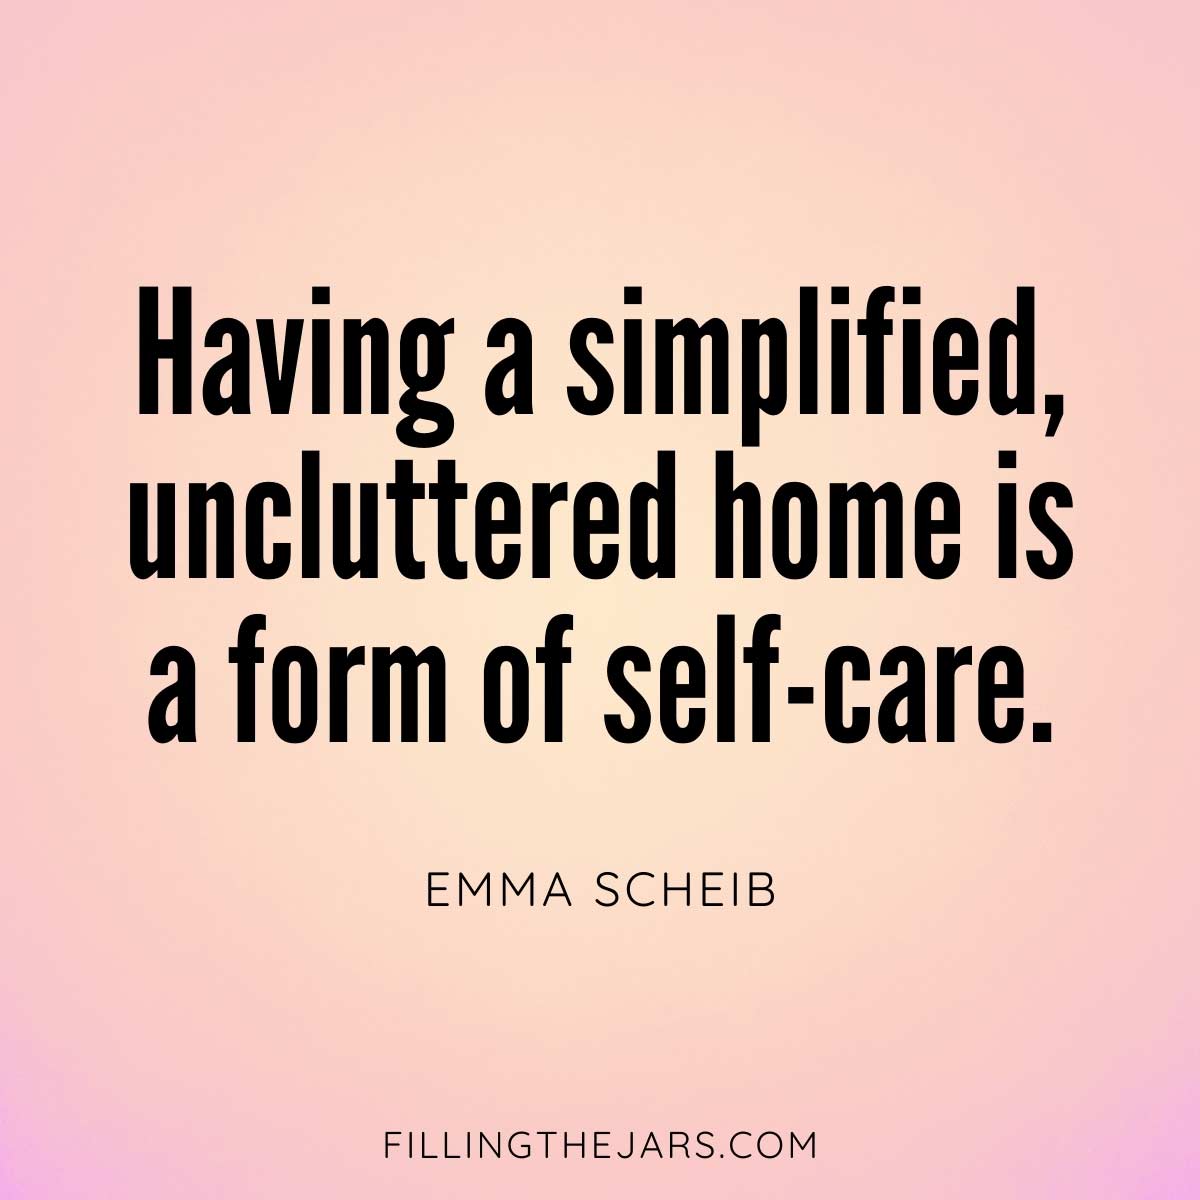 Emma Scheib uncluttered home is a form of self-care quote in black text on pink background.